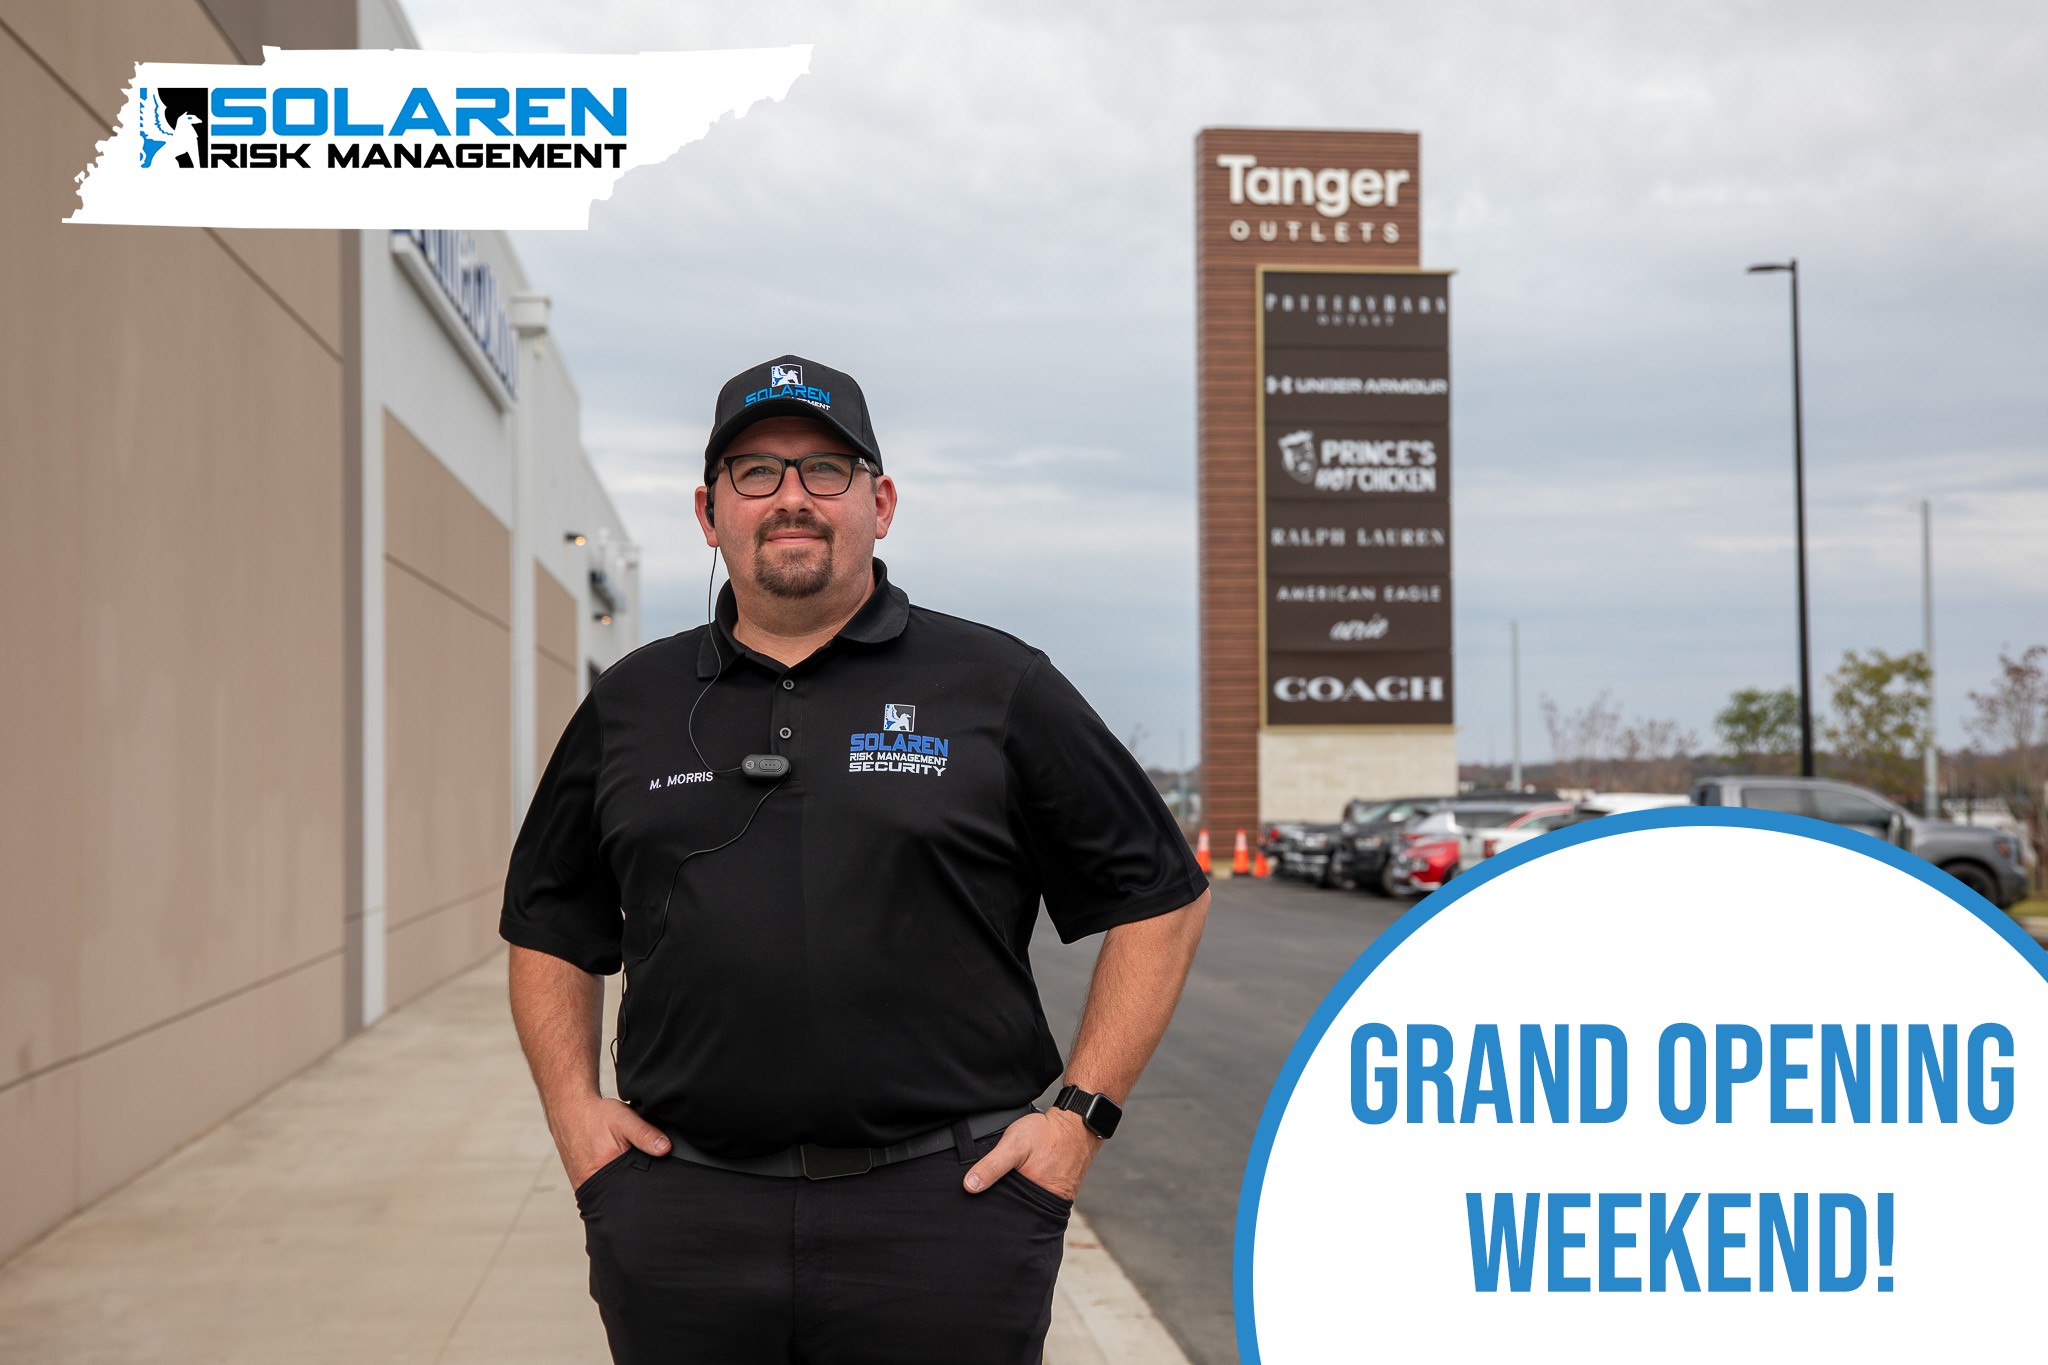 solaren-supports-tanger-outlets-grand-opening-weekend